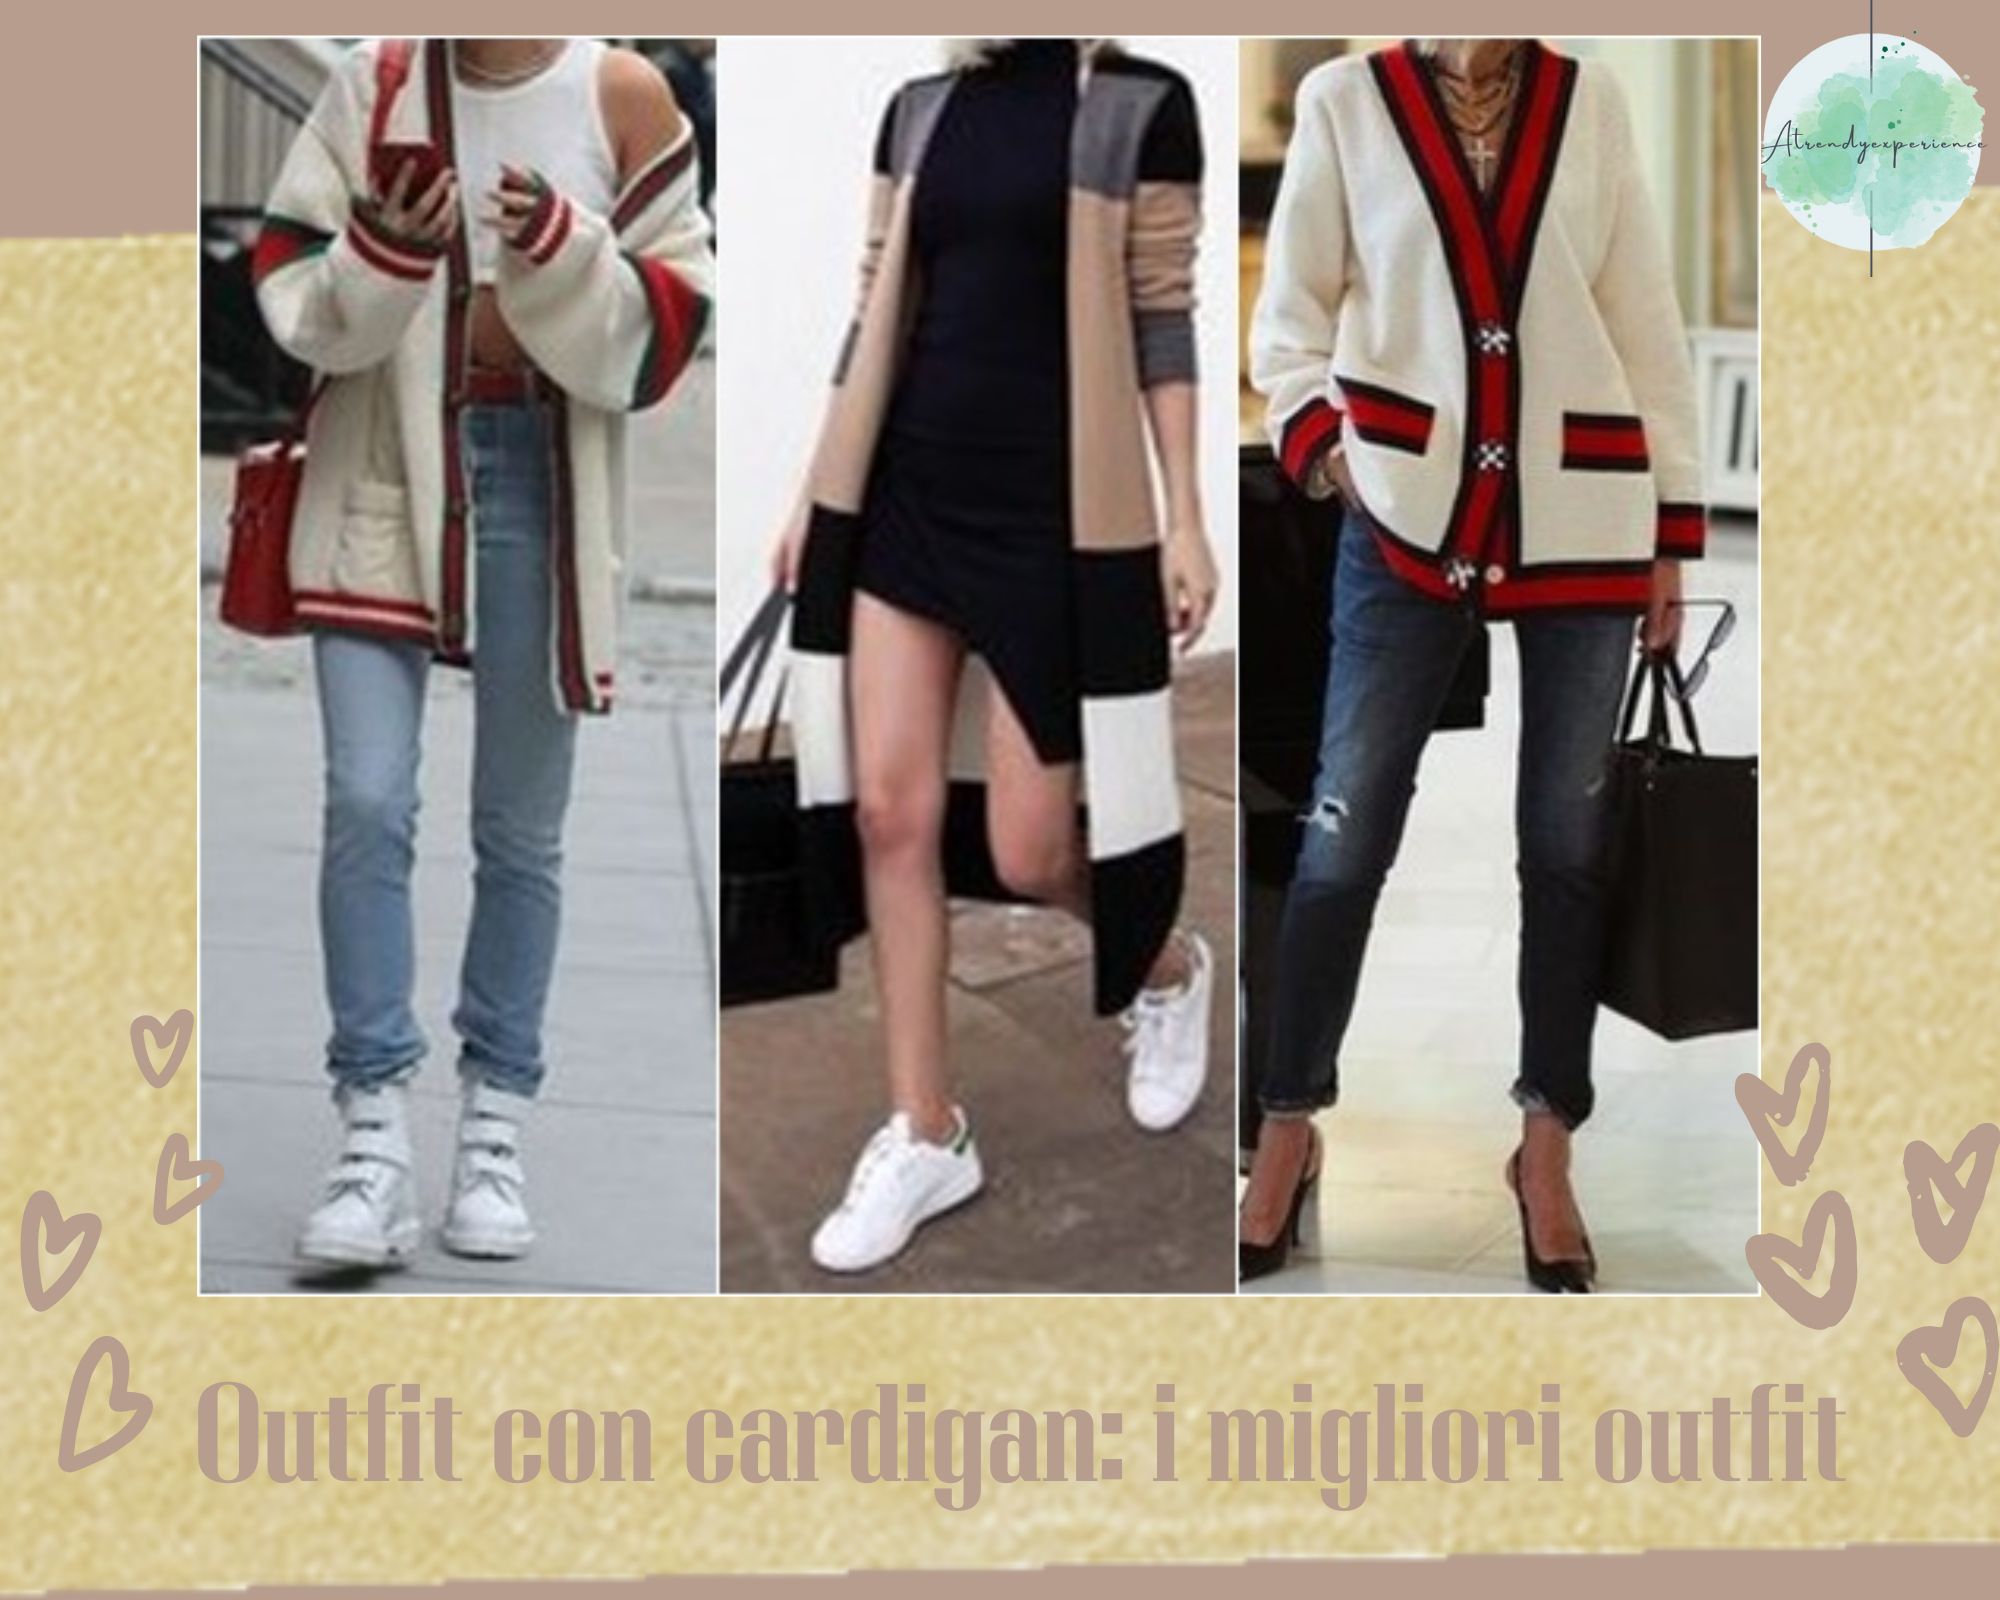 Outfit con cardigan: i migliori outfit